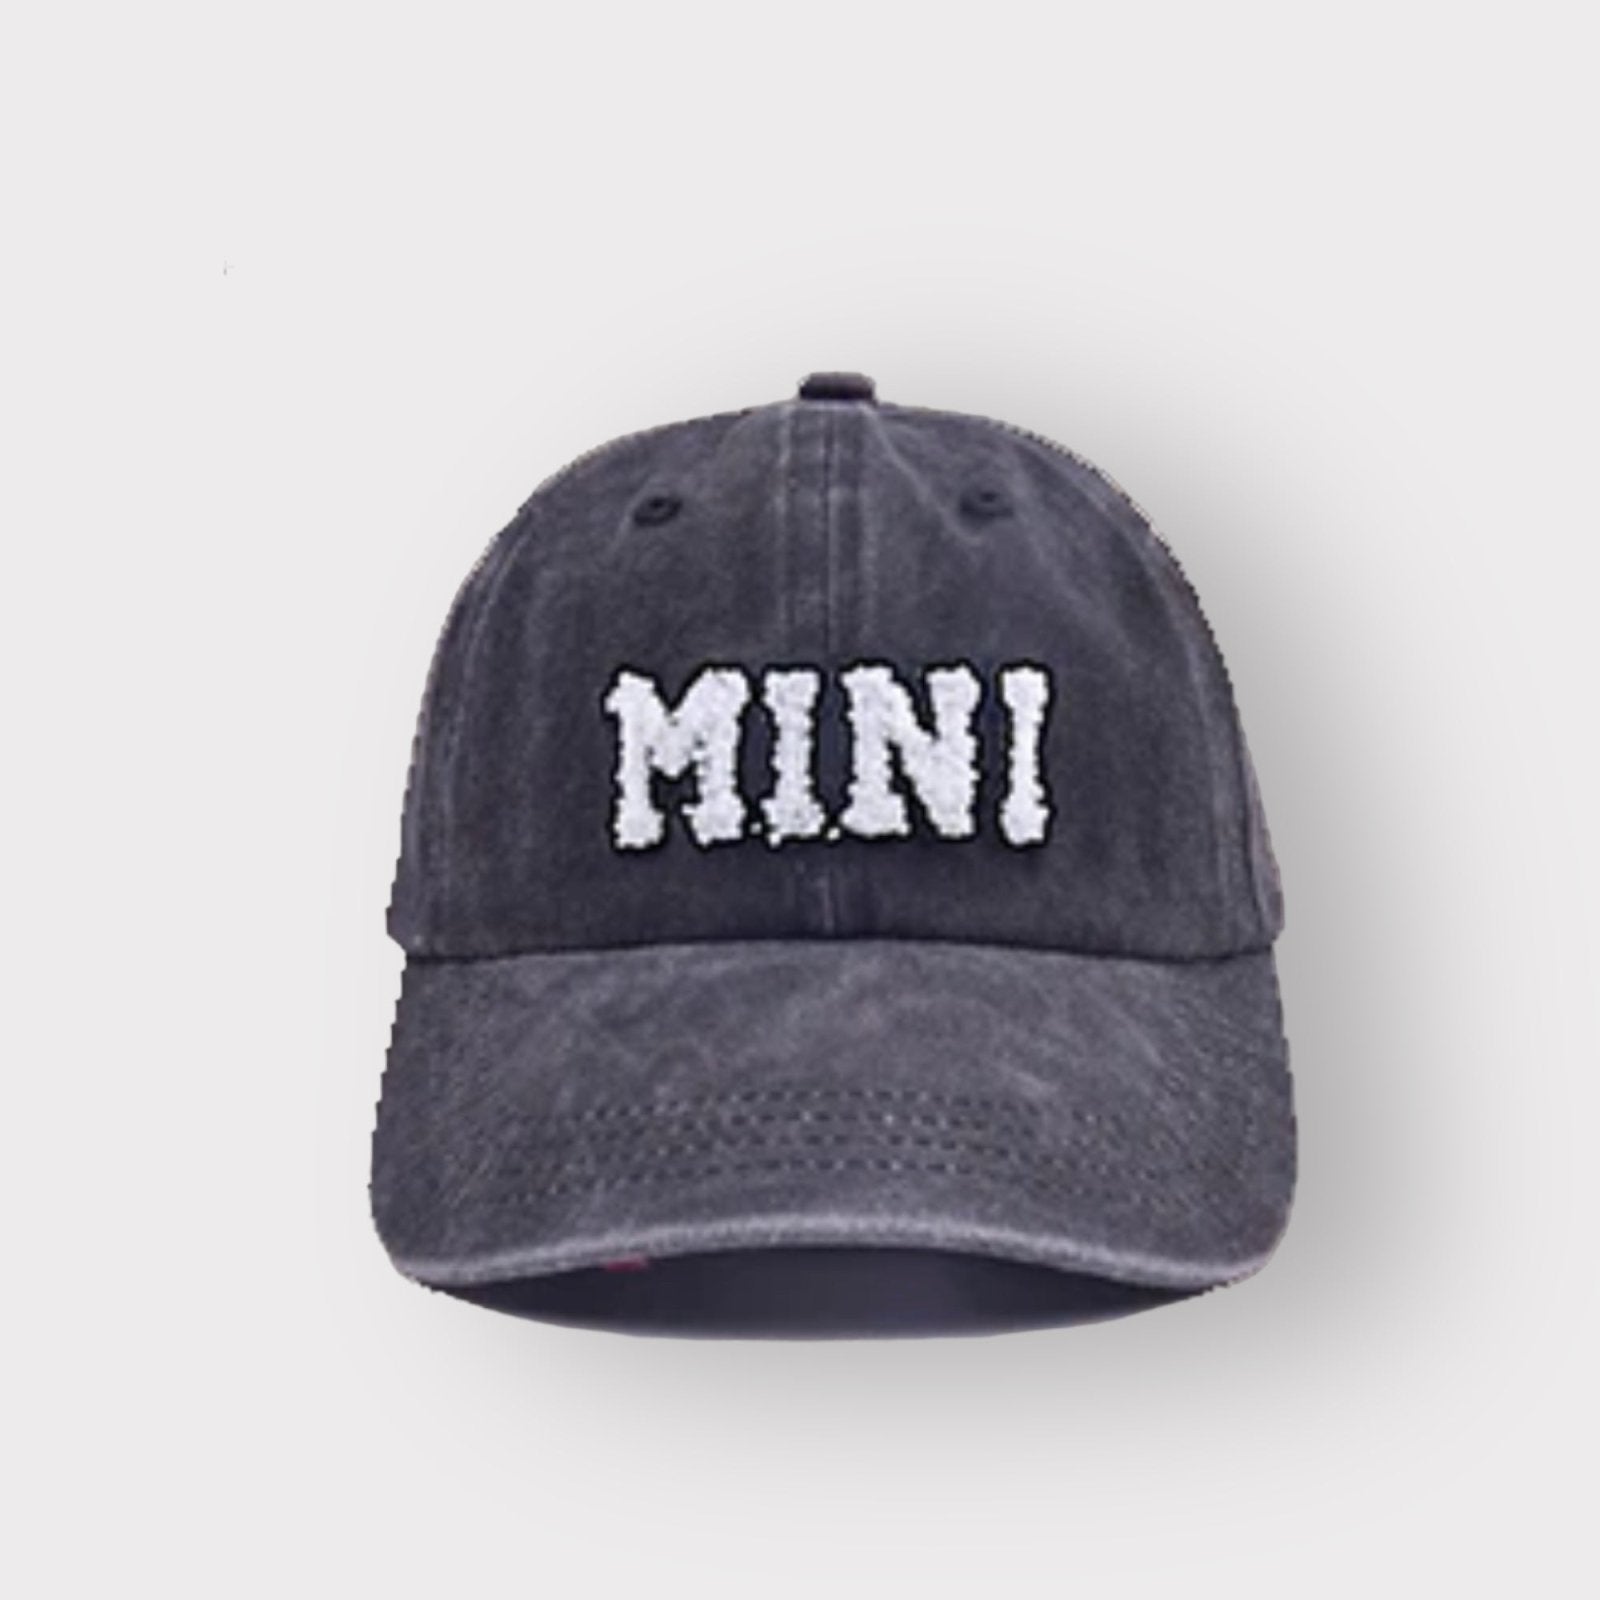 „Mini“ Basecap find Stylish Fashion for Little People- at Little Foxx Concept Store